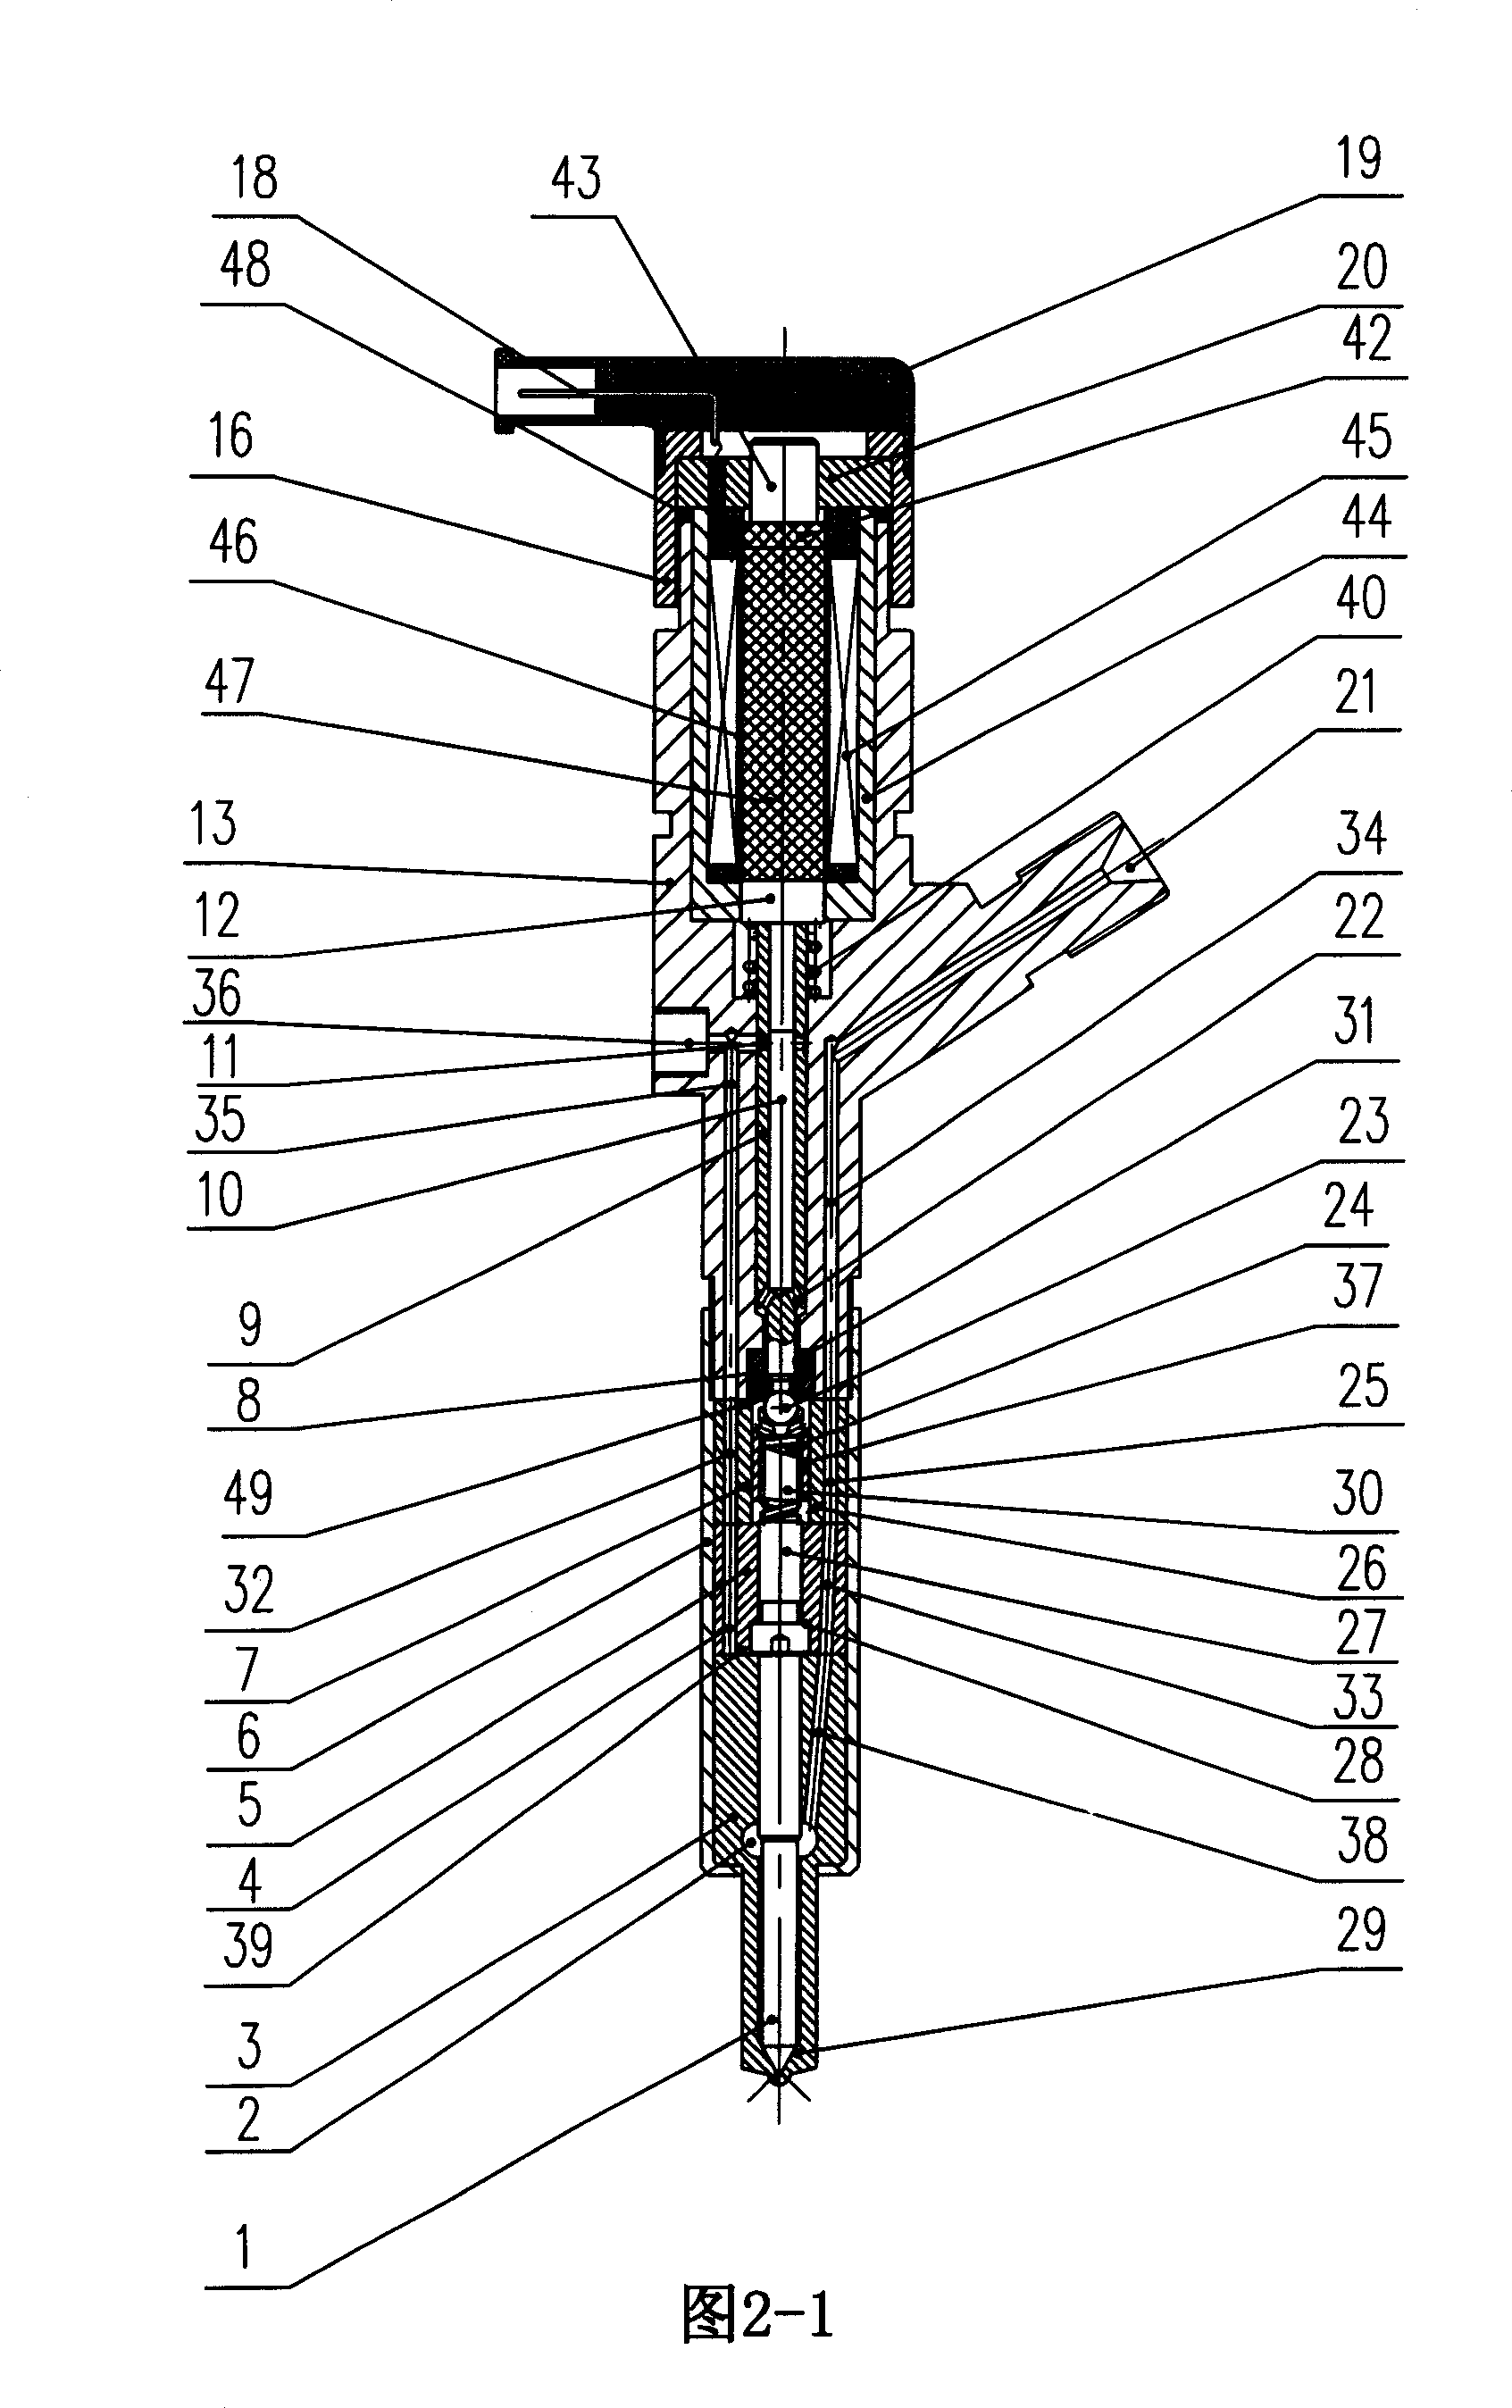 Electric-controlled diesel oil fuel oil injector driven by telescoping element